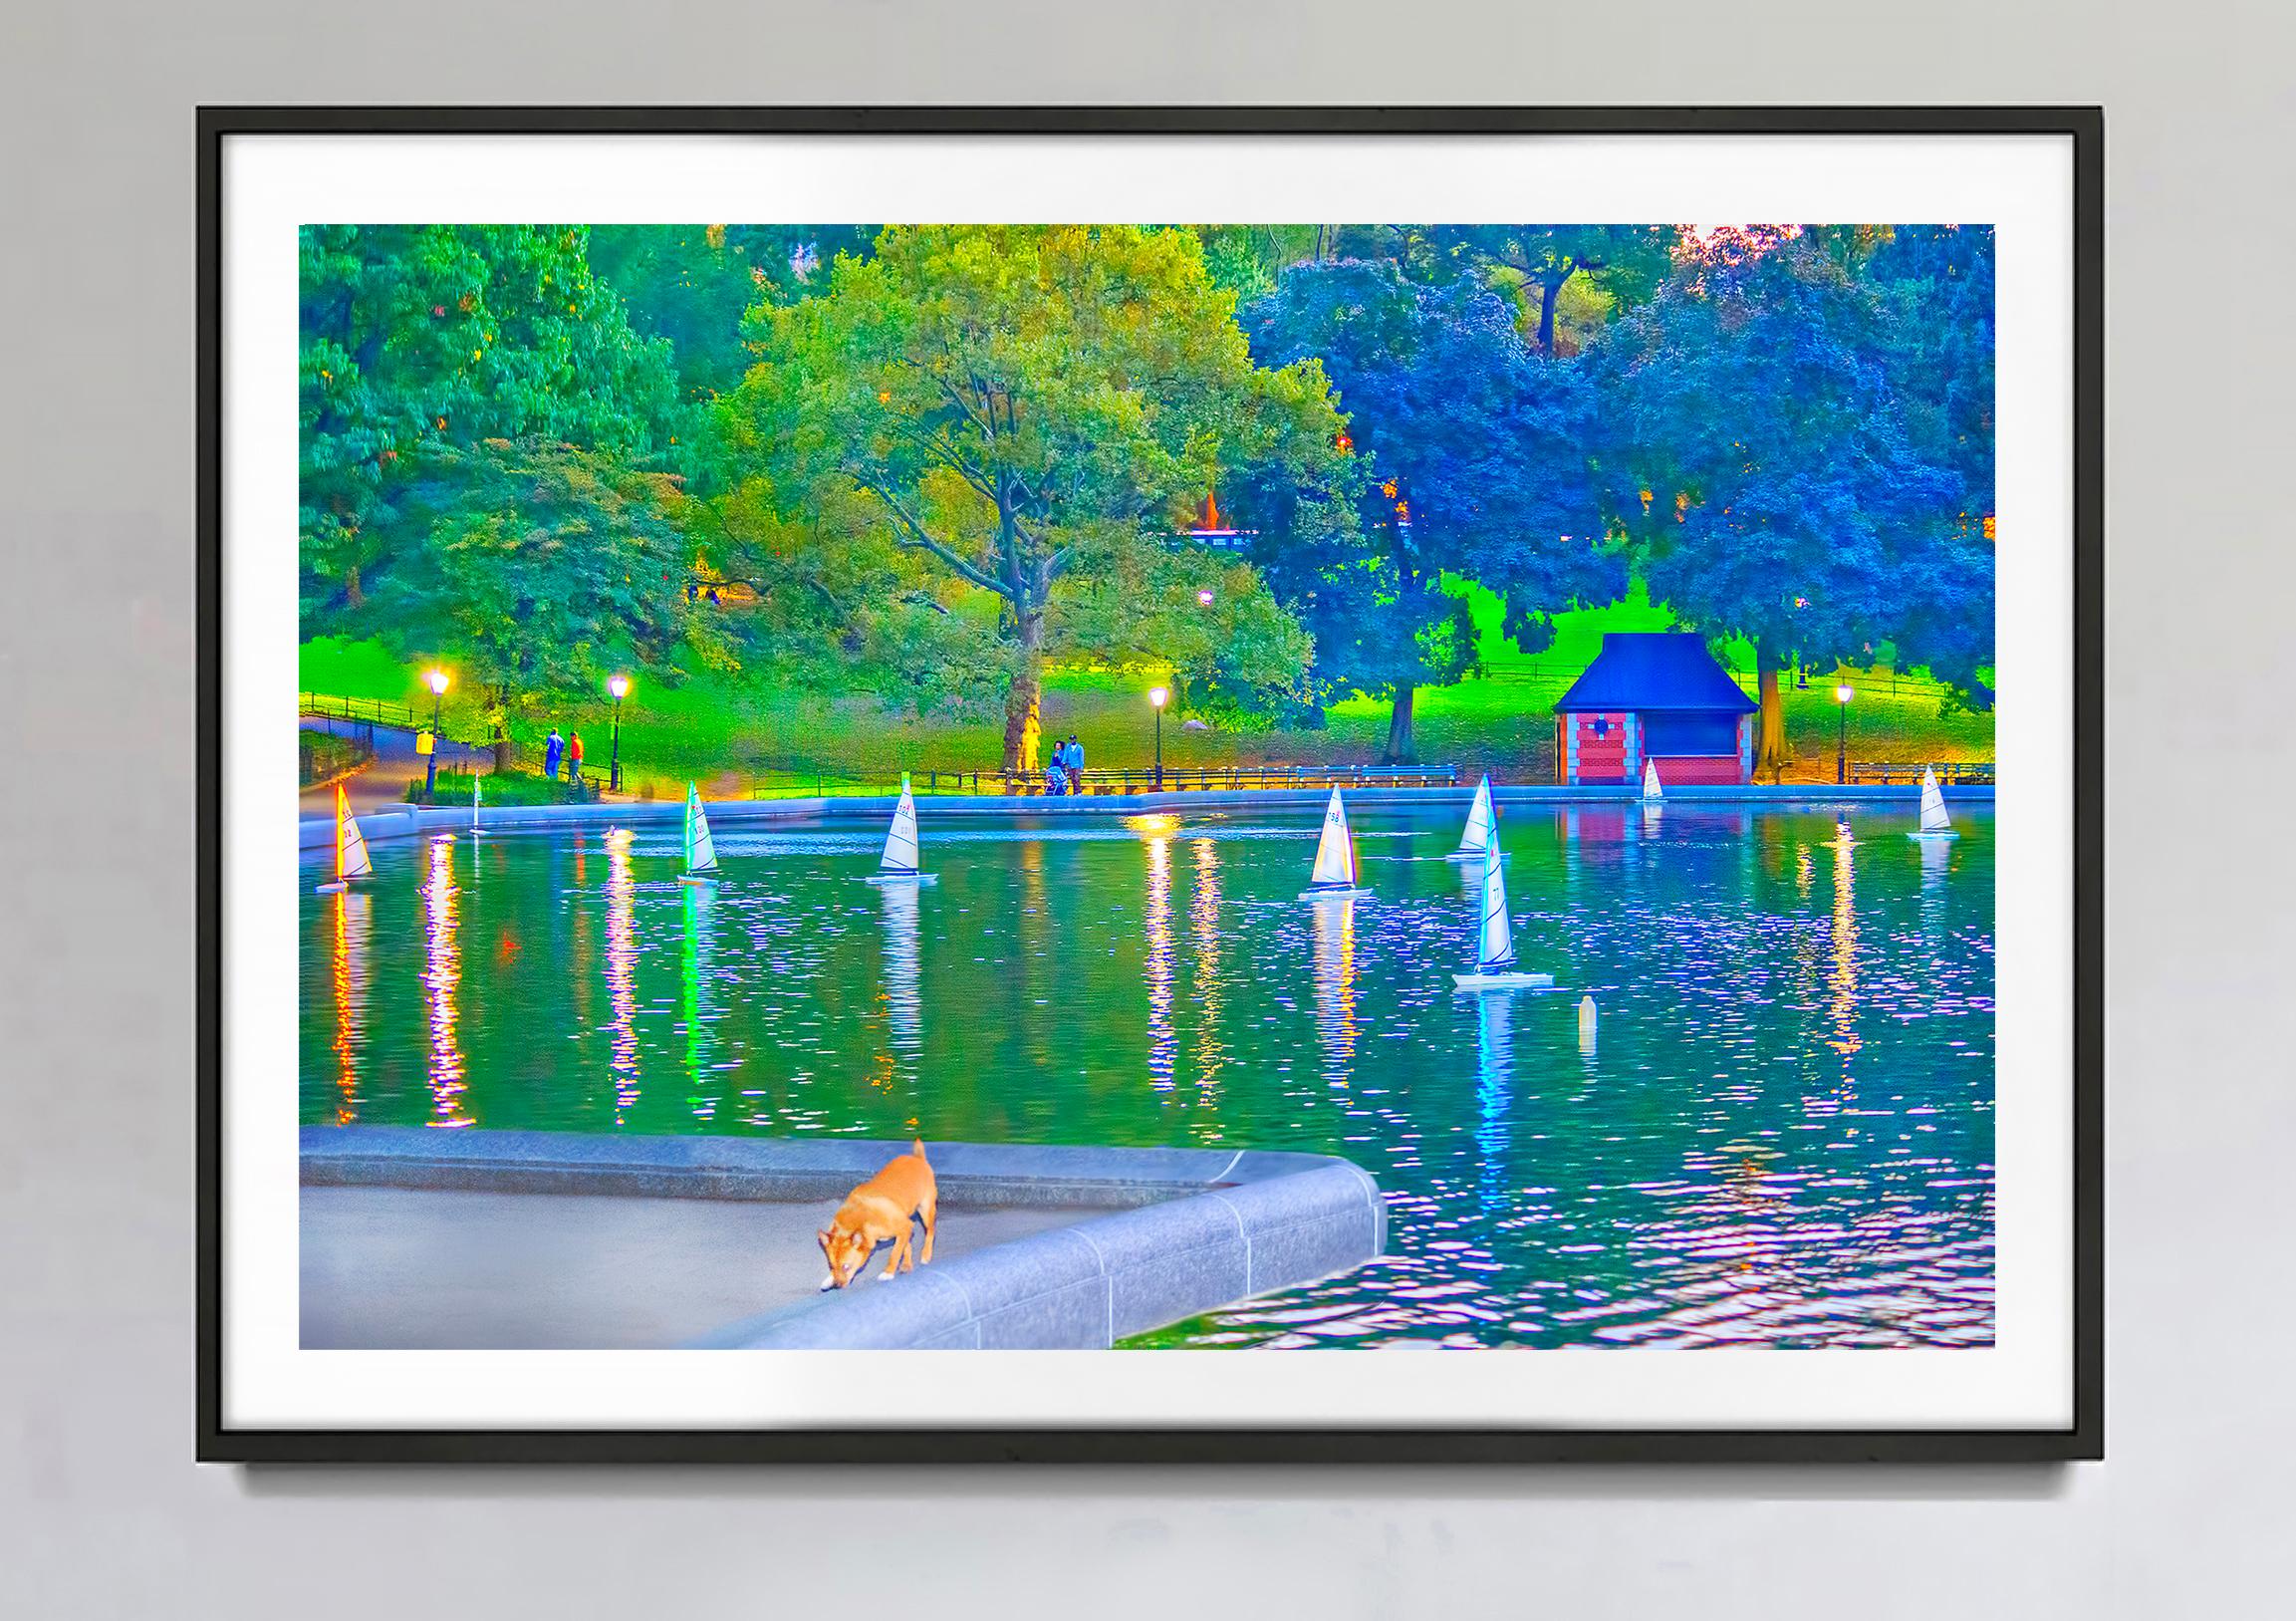 Model Sailboats In Central Park Pond, New York City - Photograph by Mitchell Funk